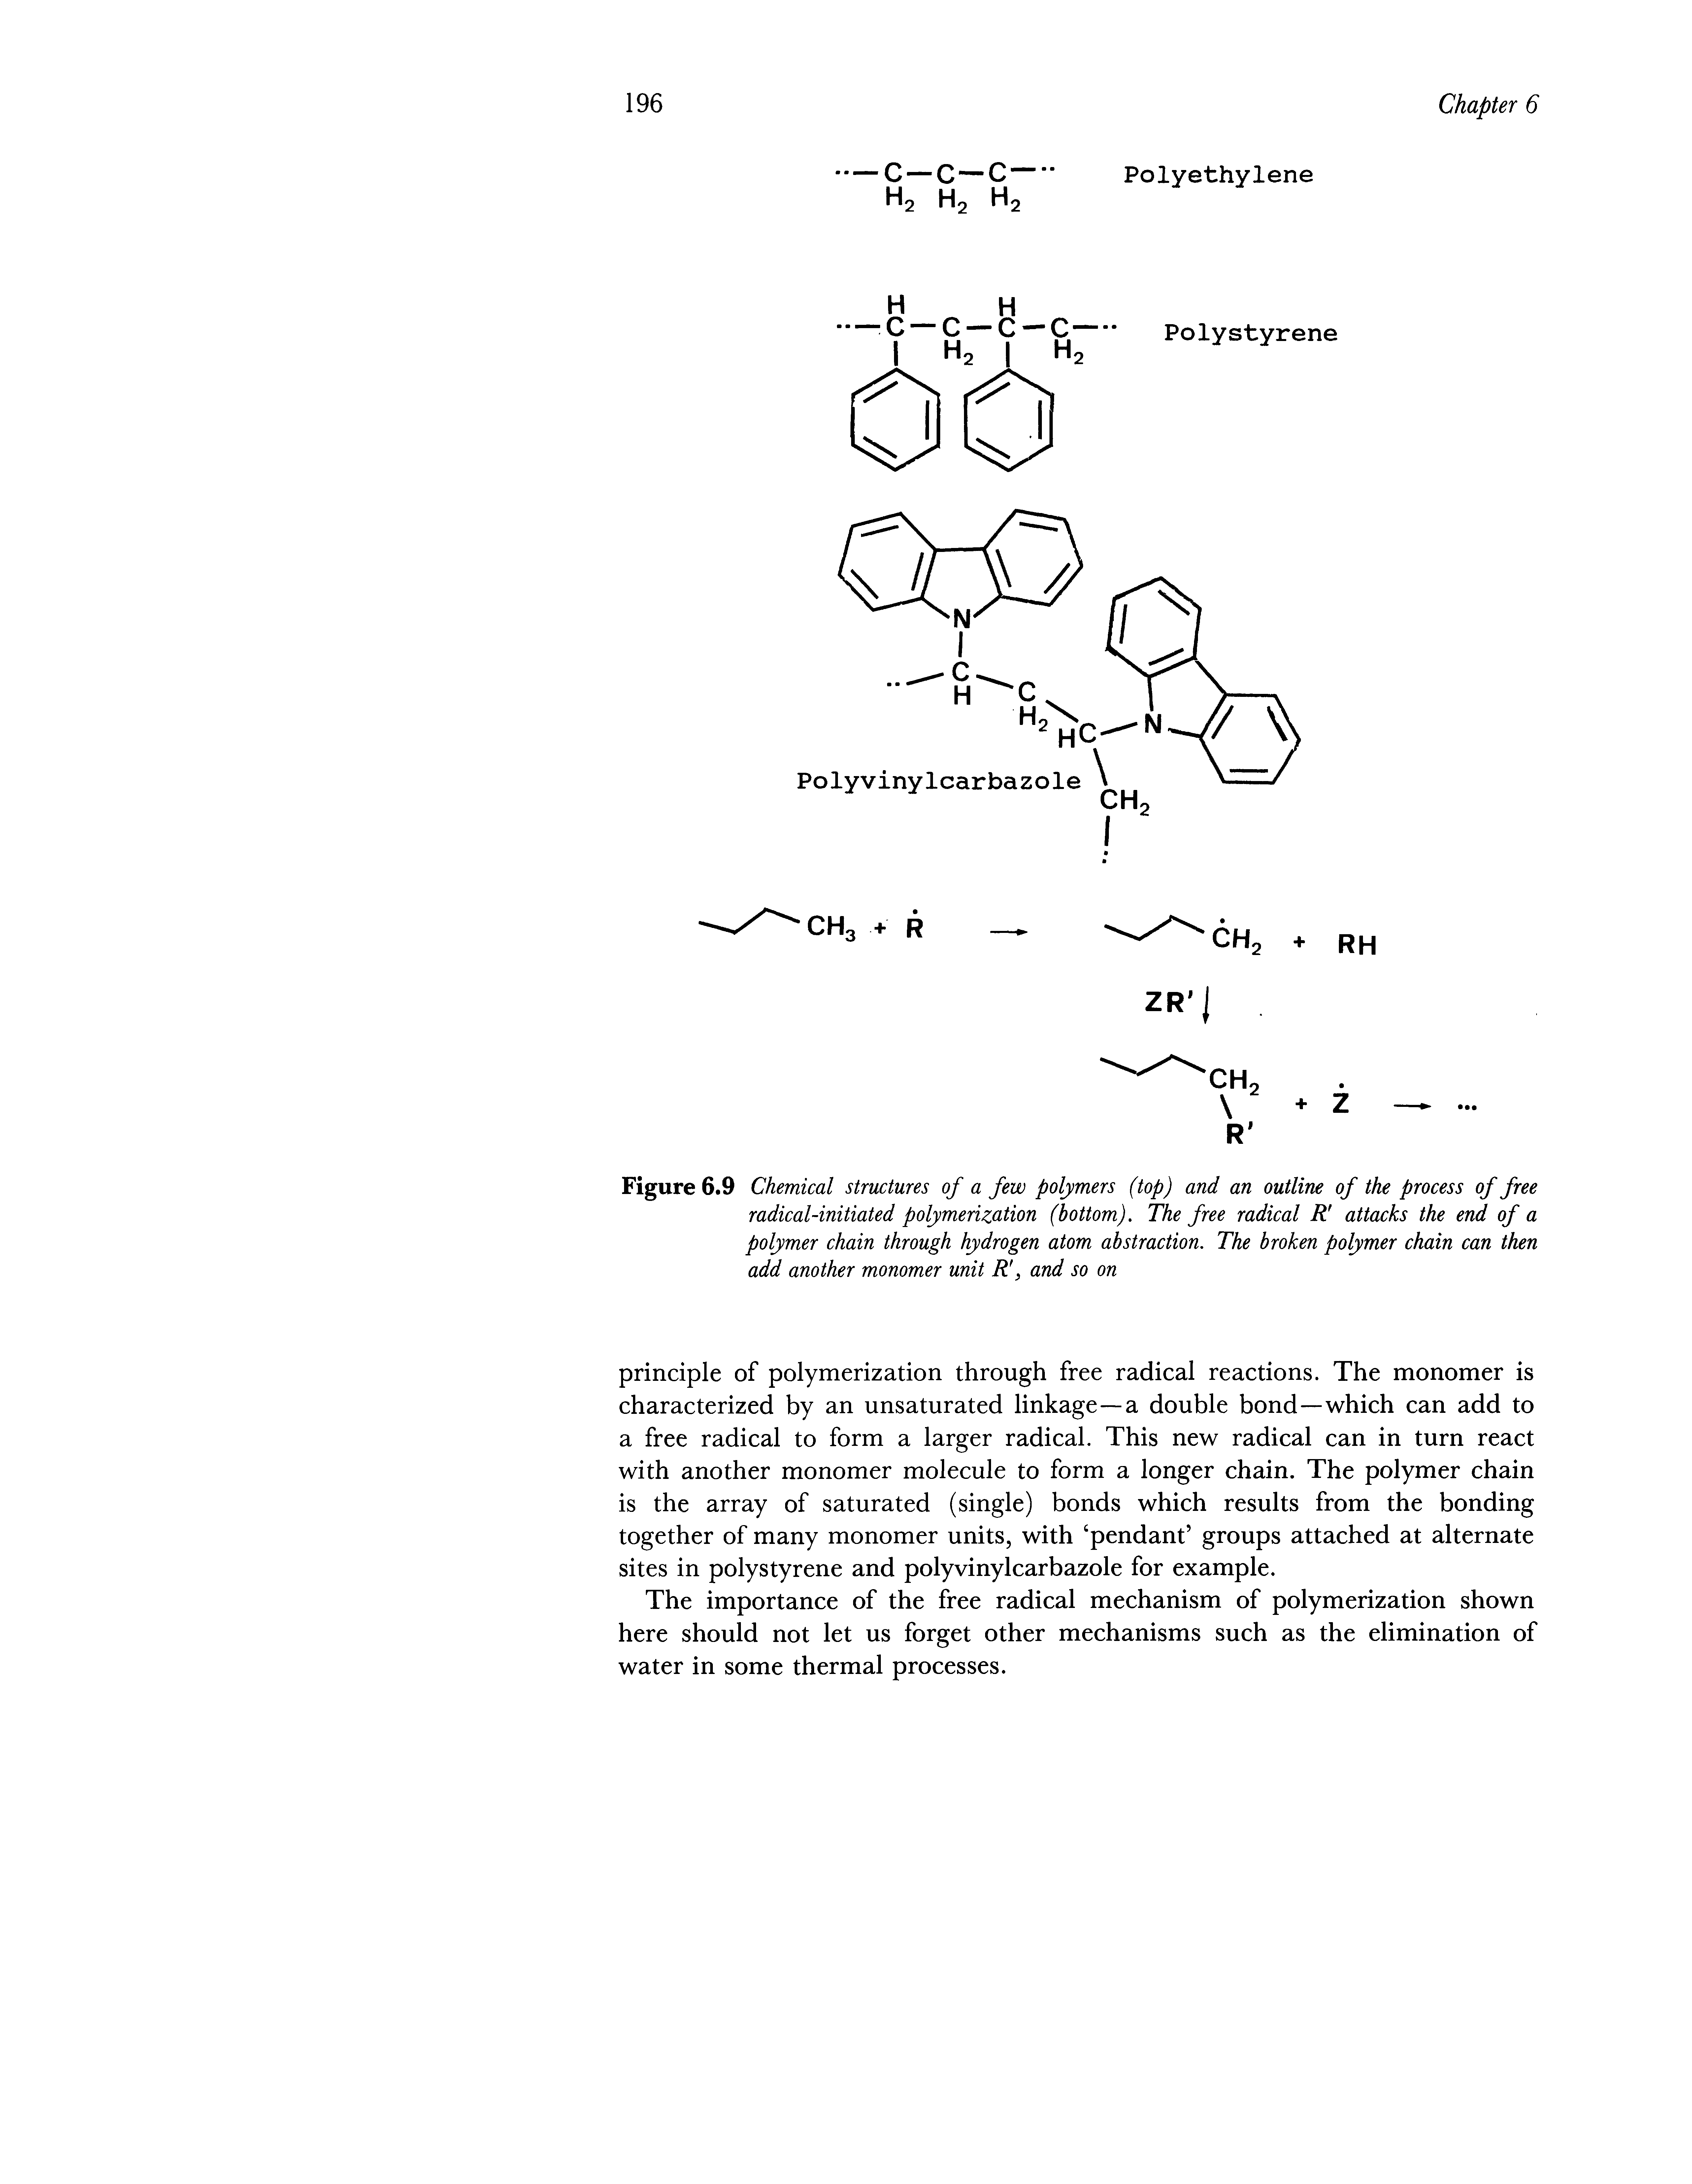 Figure 6.9 Chemical structures of a few polymers (top) and an outline of the process of free radical-initiated polymerization (bottom). The free radical R attacks the end of a polymer chain through hydrogen atom abstraction. The broken polymer chain can then add another monomer unit R , and so on...